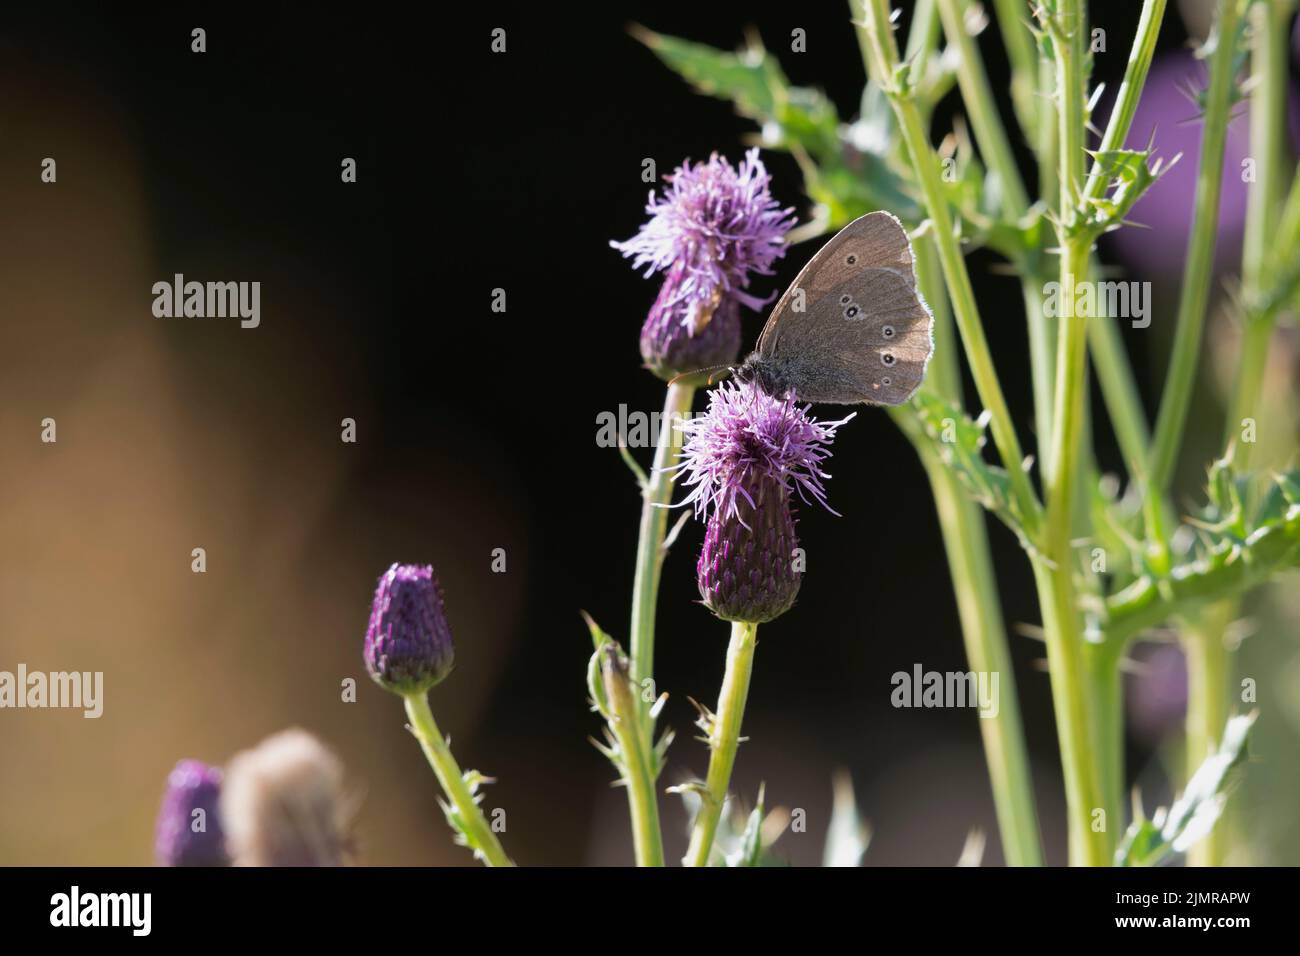 A Ringlet Butterfly (Aphantopus Hyperantus) on a Creeping Thistle (Cirsium Arvense) Flower Head in Sunshine Against a Dark Background Stock Photo